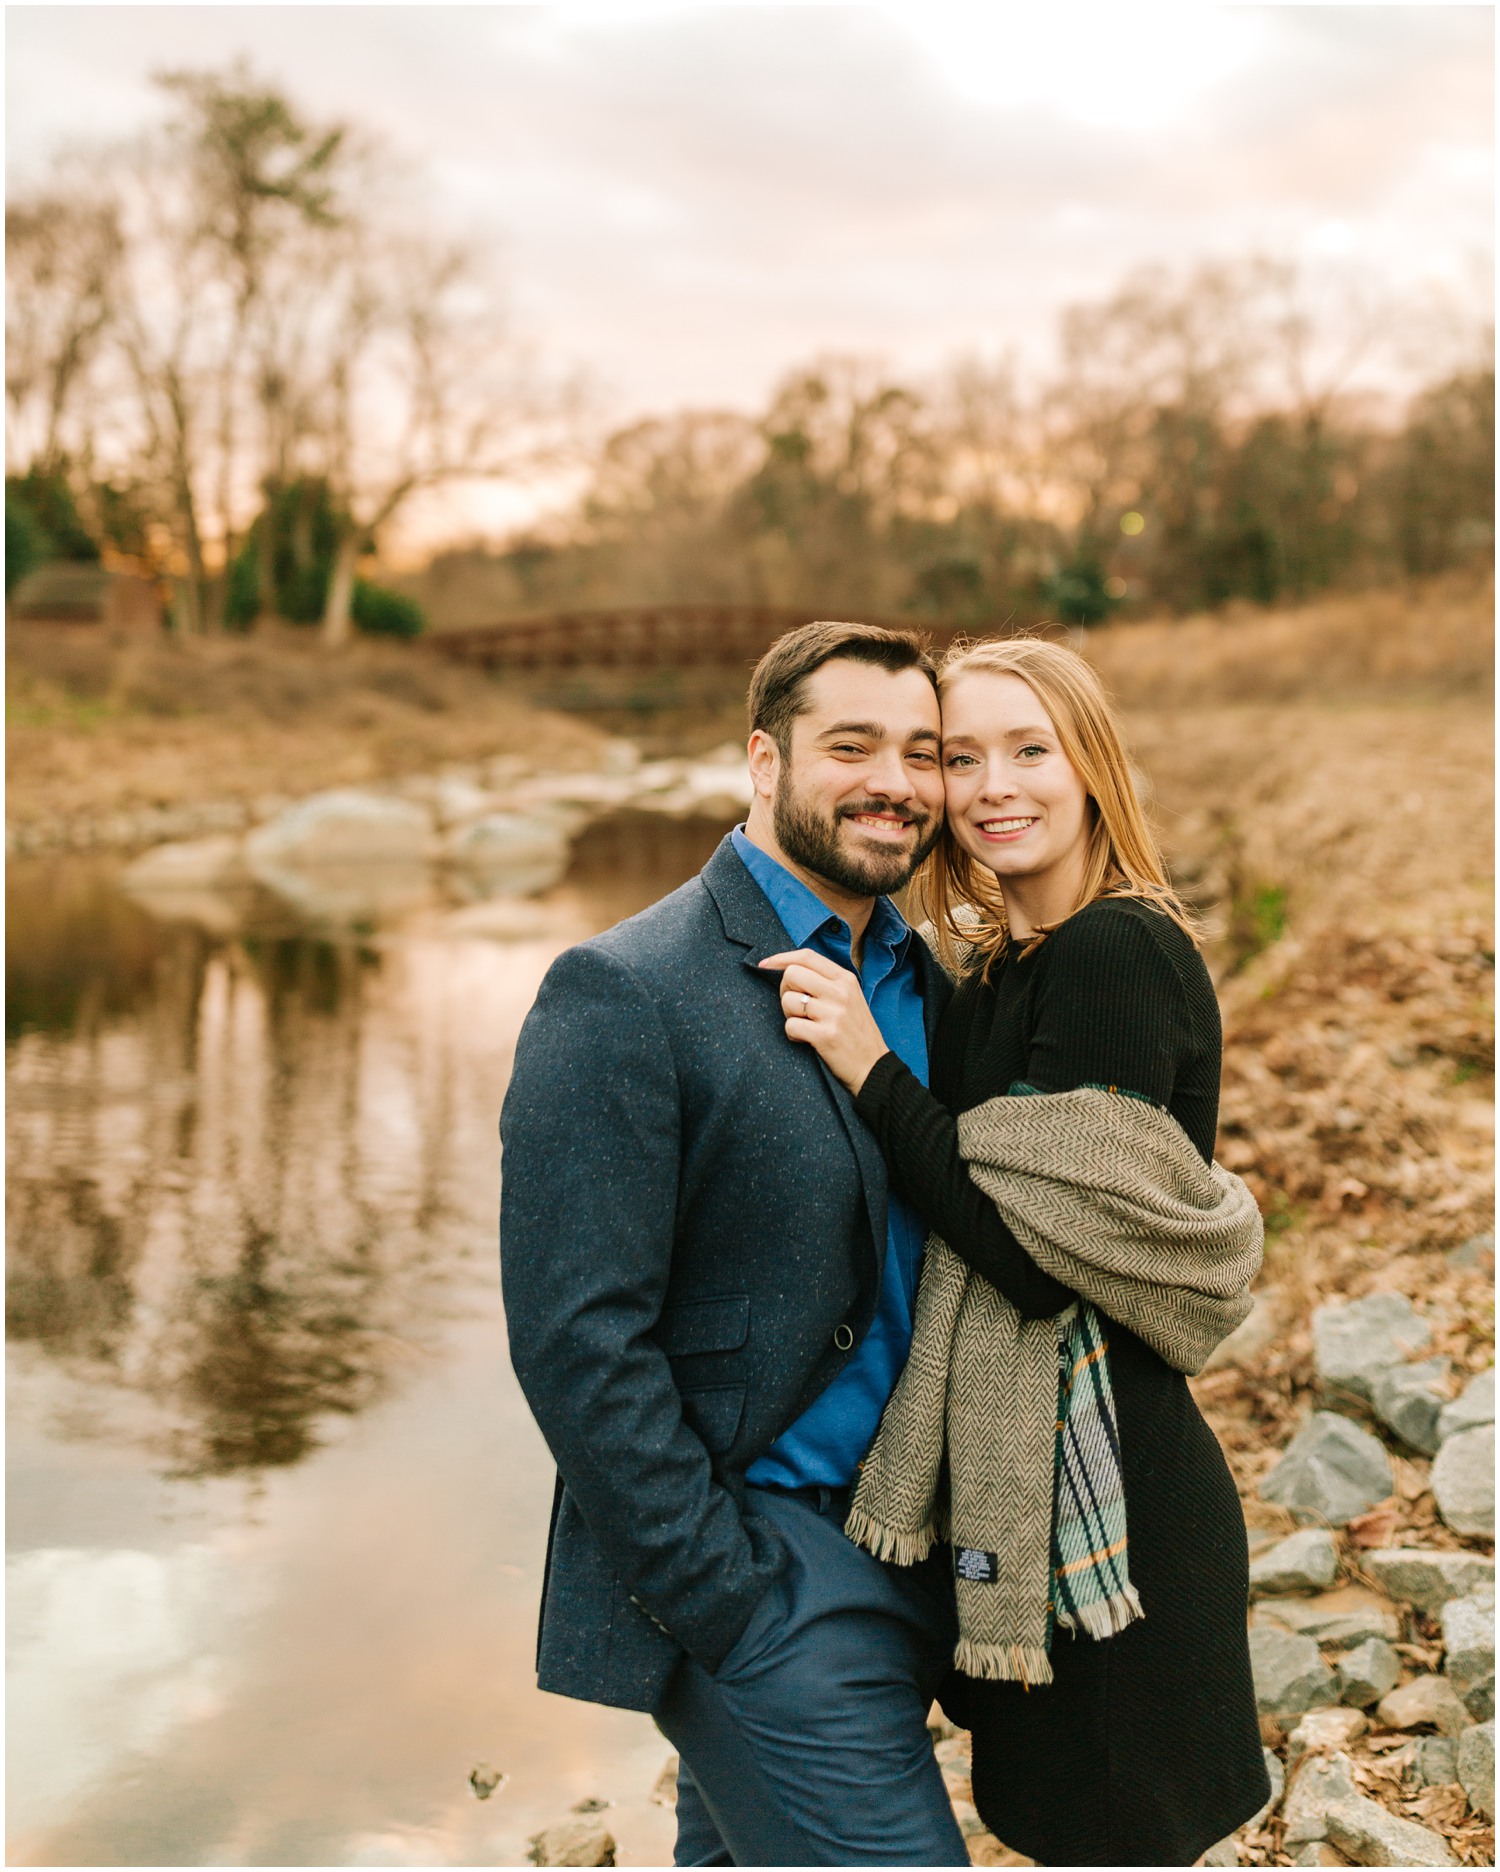 Midtown Park engagement session with Charlotte NC wedding photographer Chelsea Renay